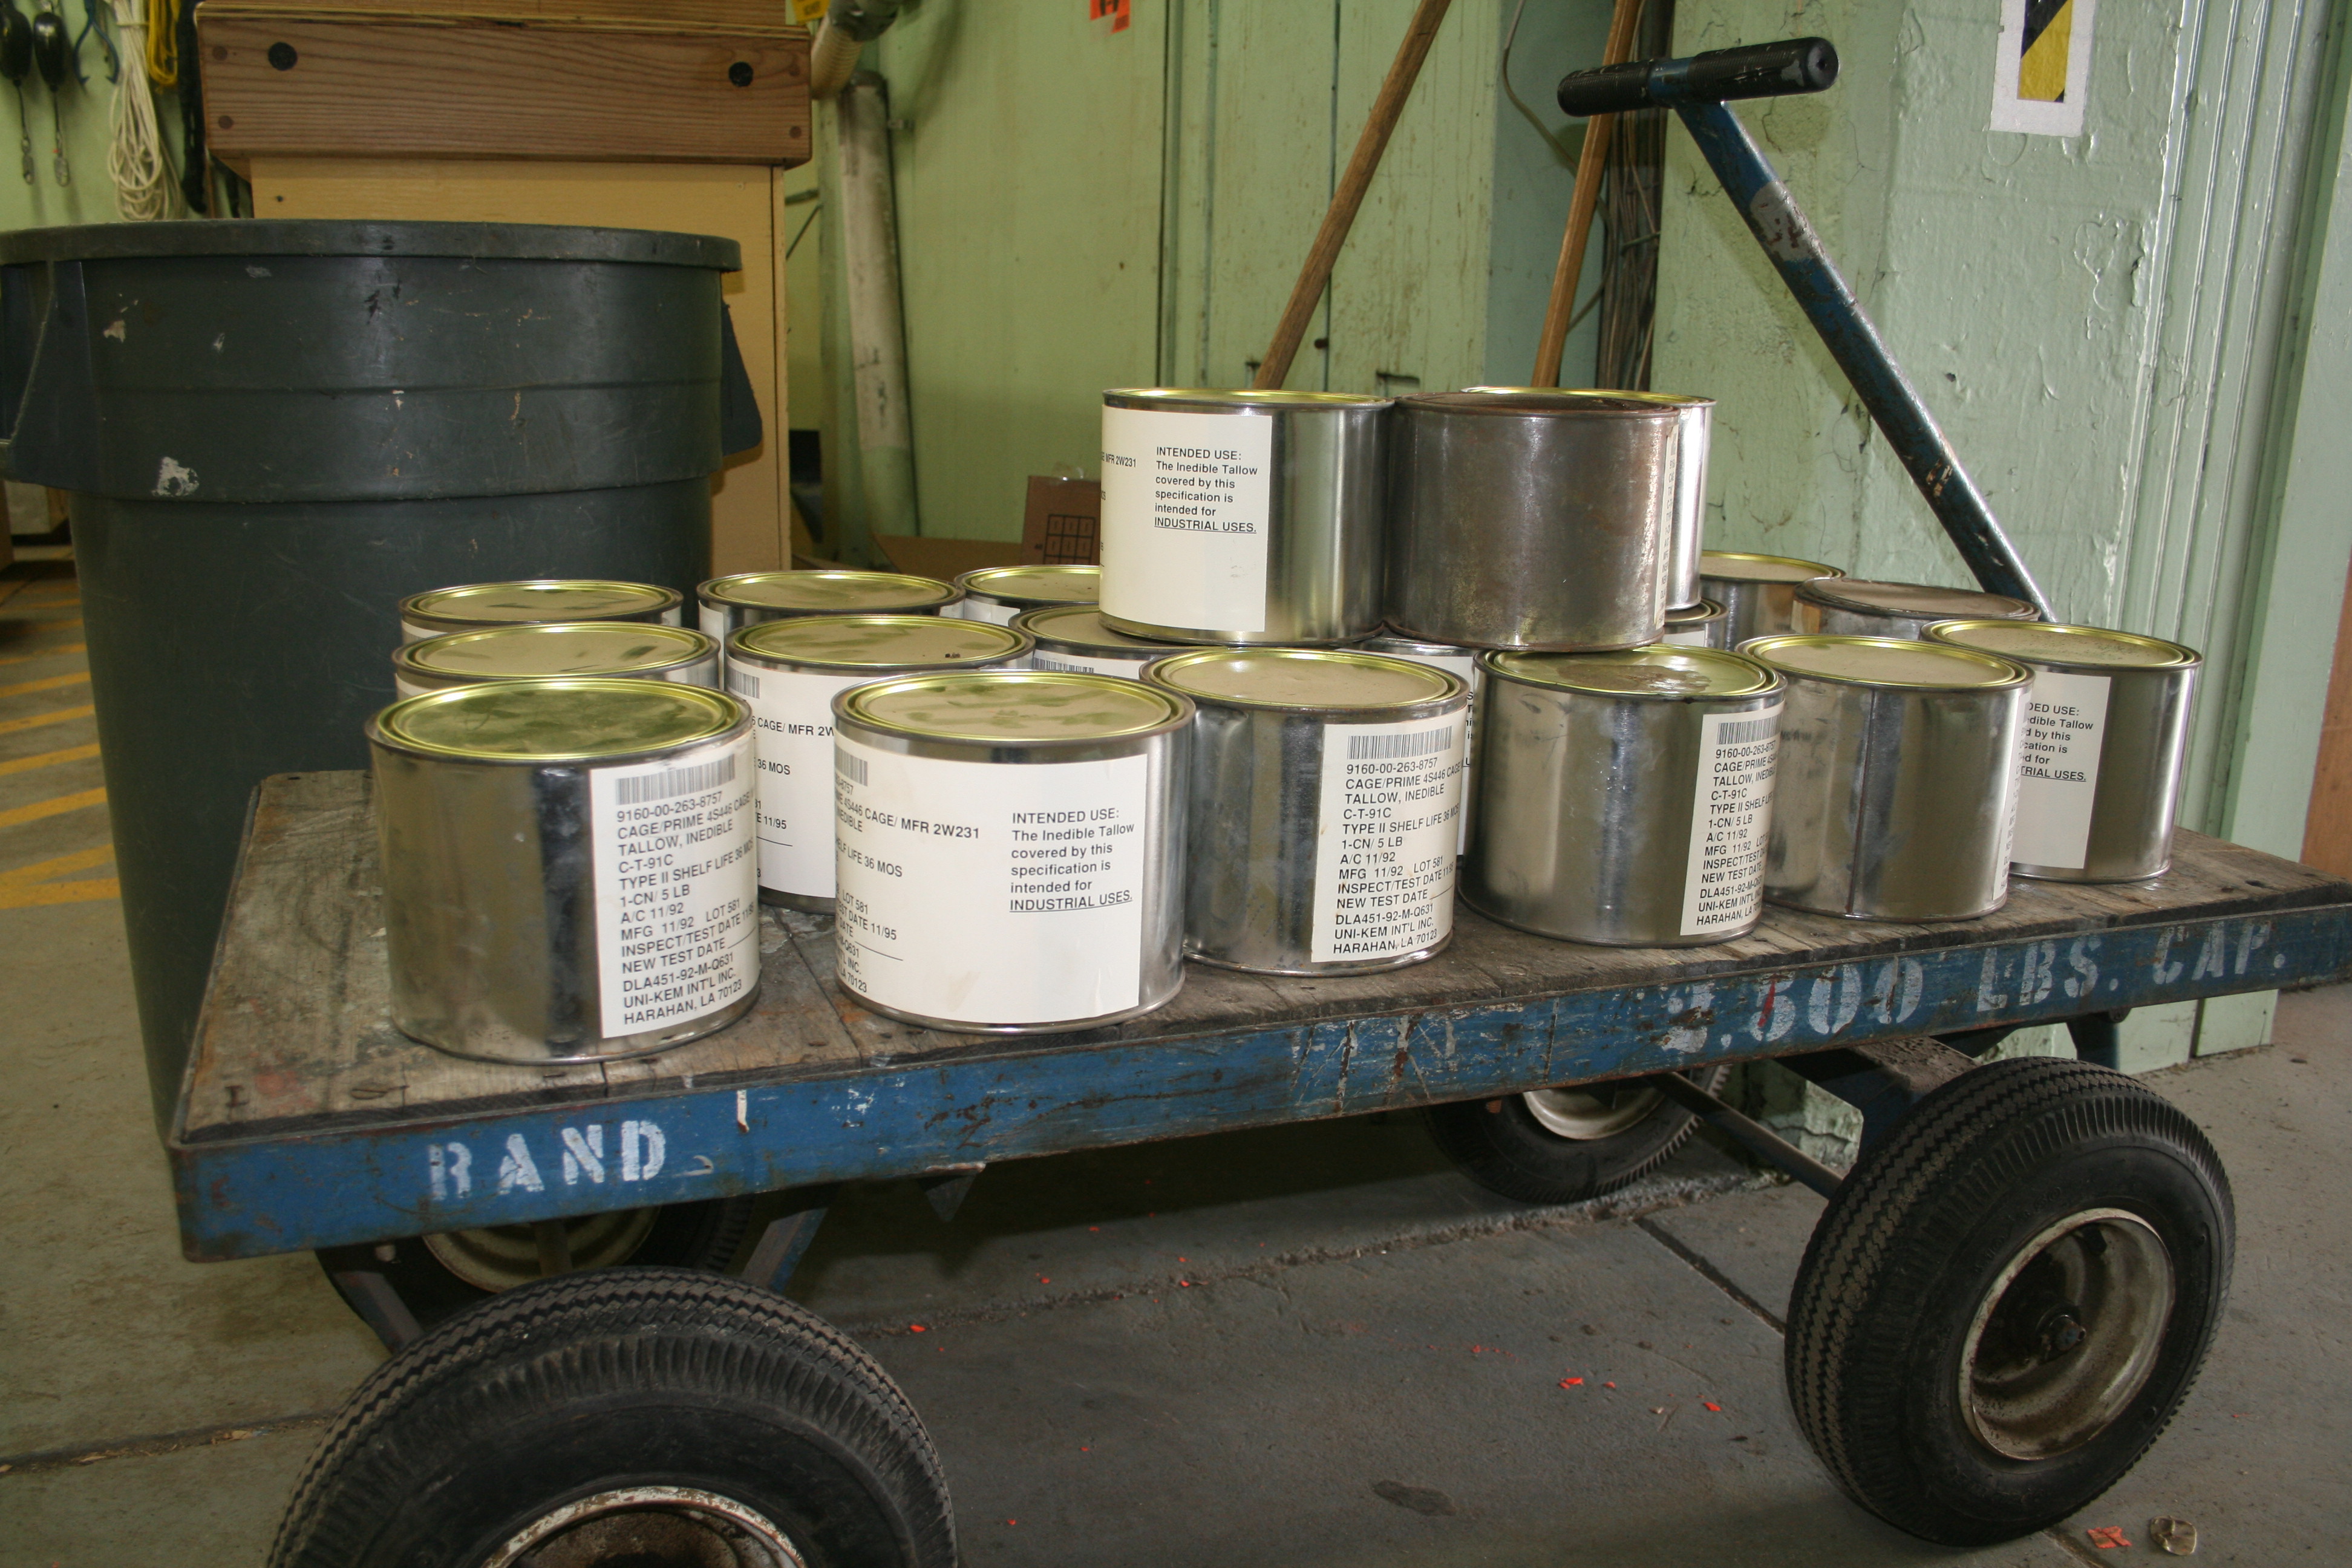 Cans of tallow